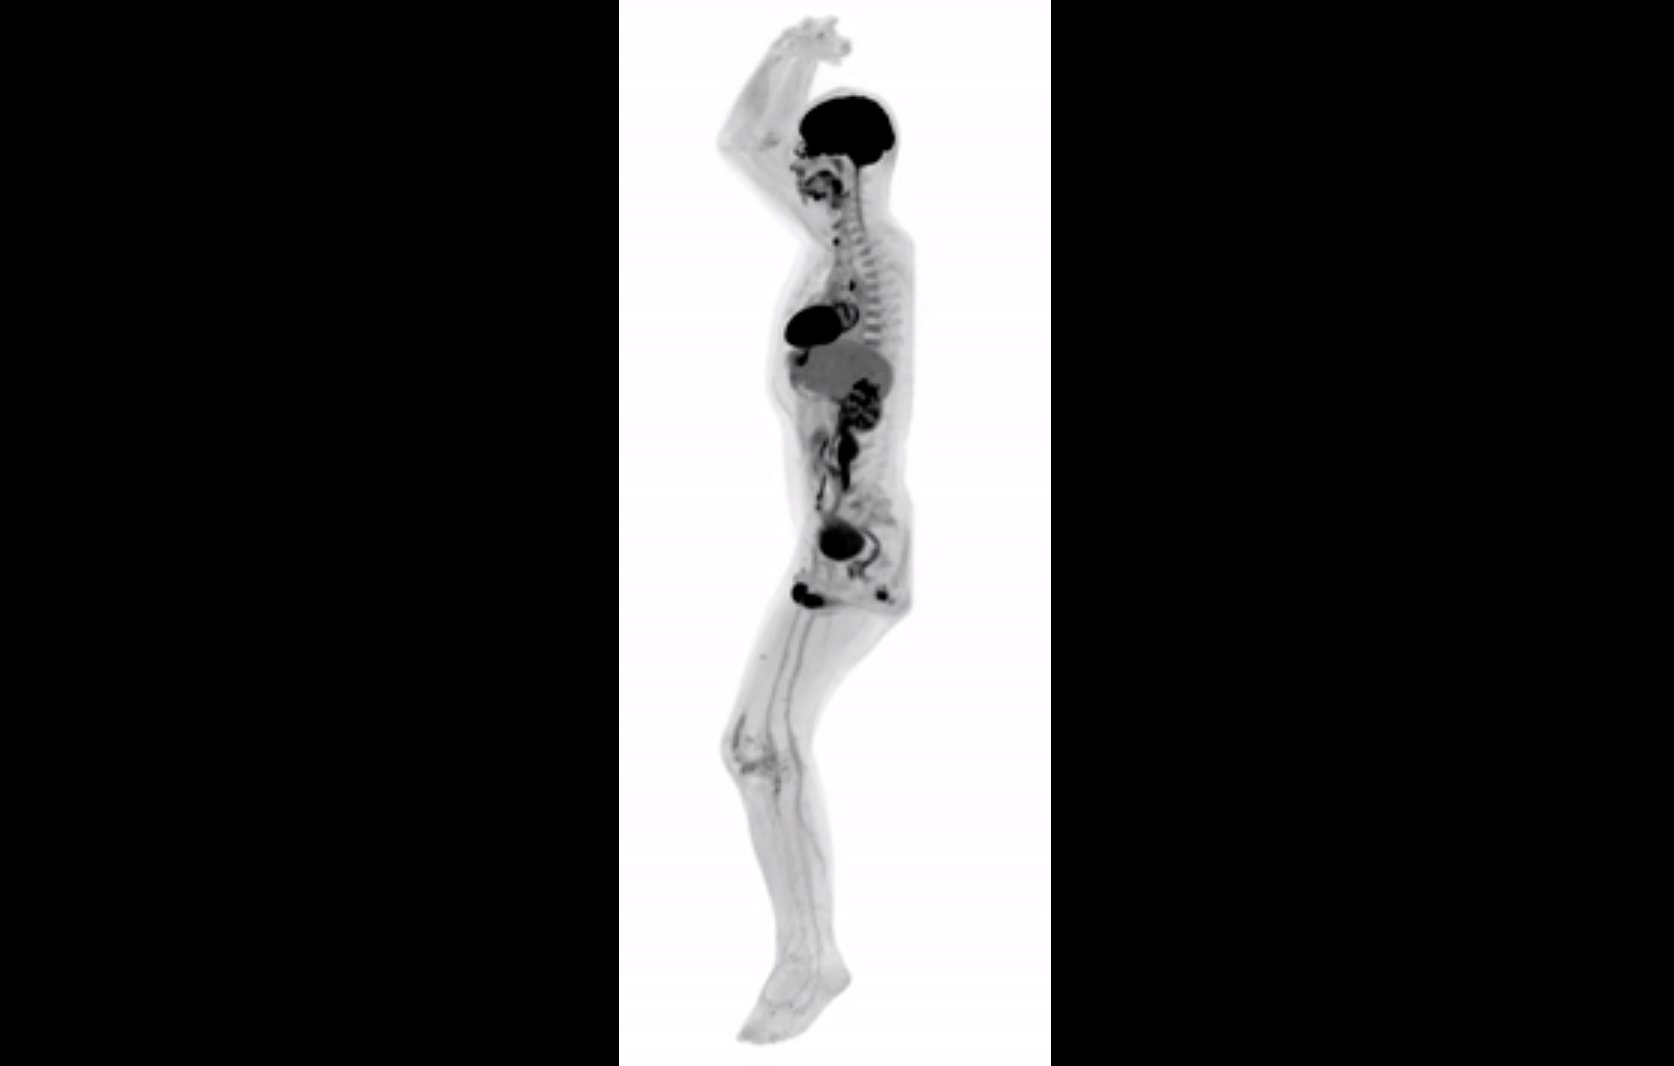 A new milestone in medicine: the world's first scanner for the whole body